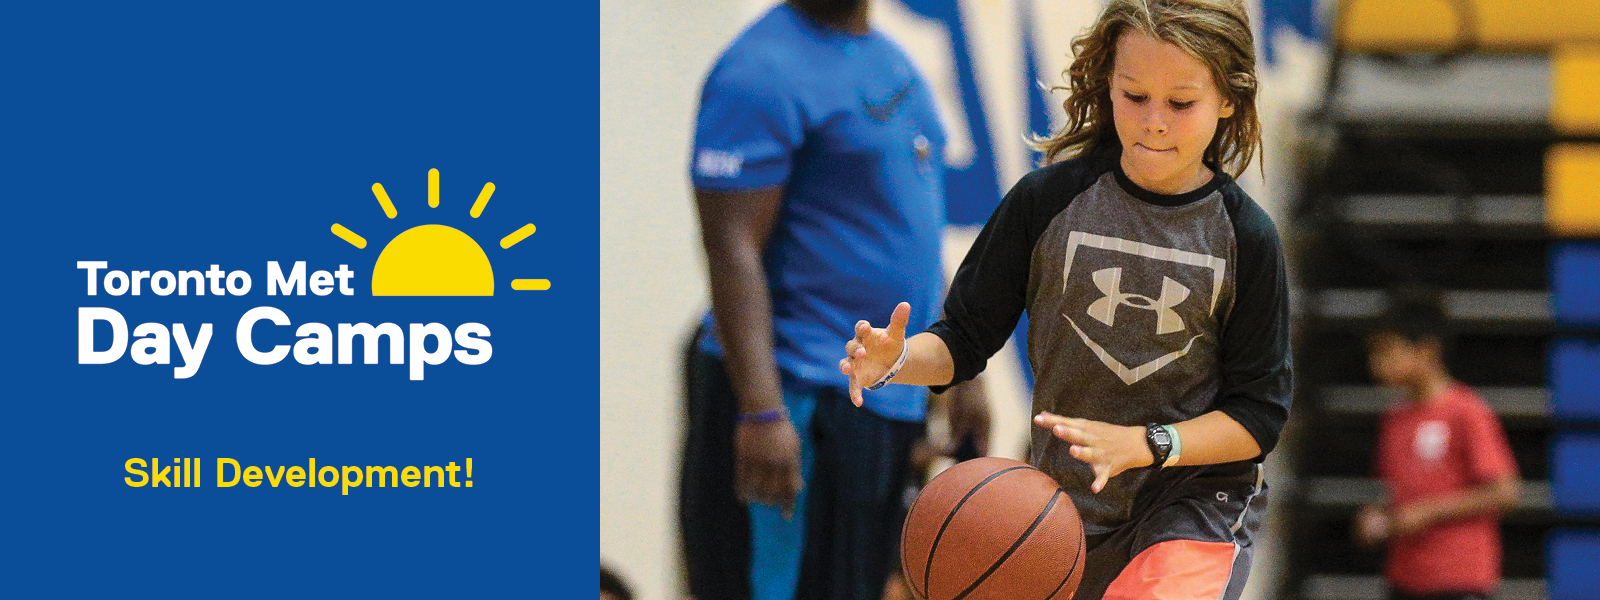 A camper with long hair practices dribbling a basketball. Text says "Skill Development!"